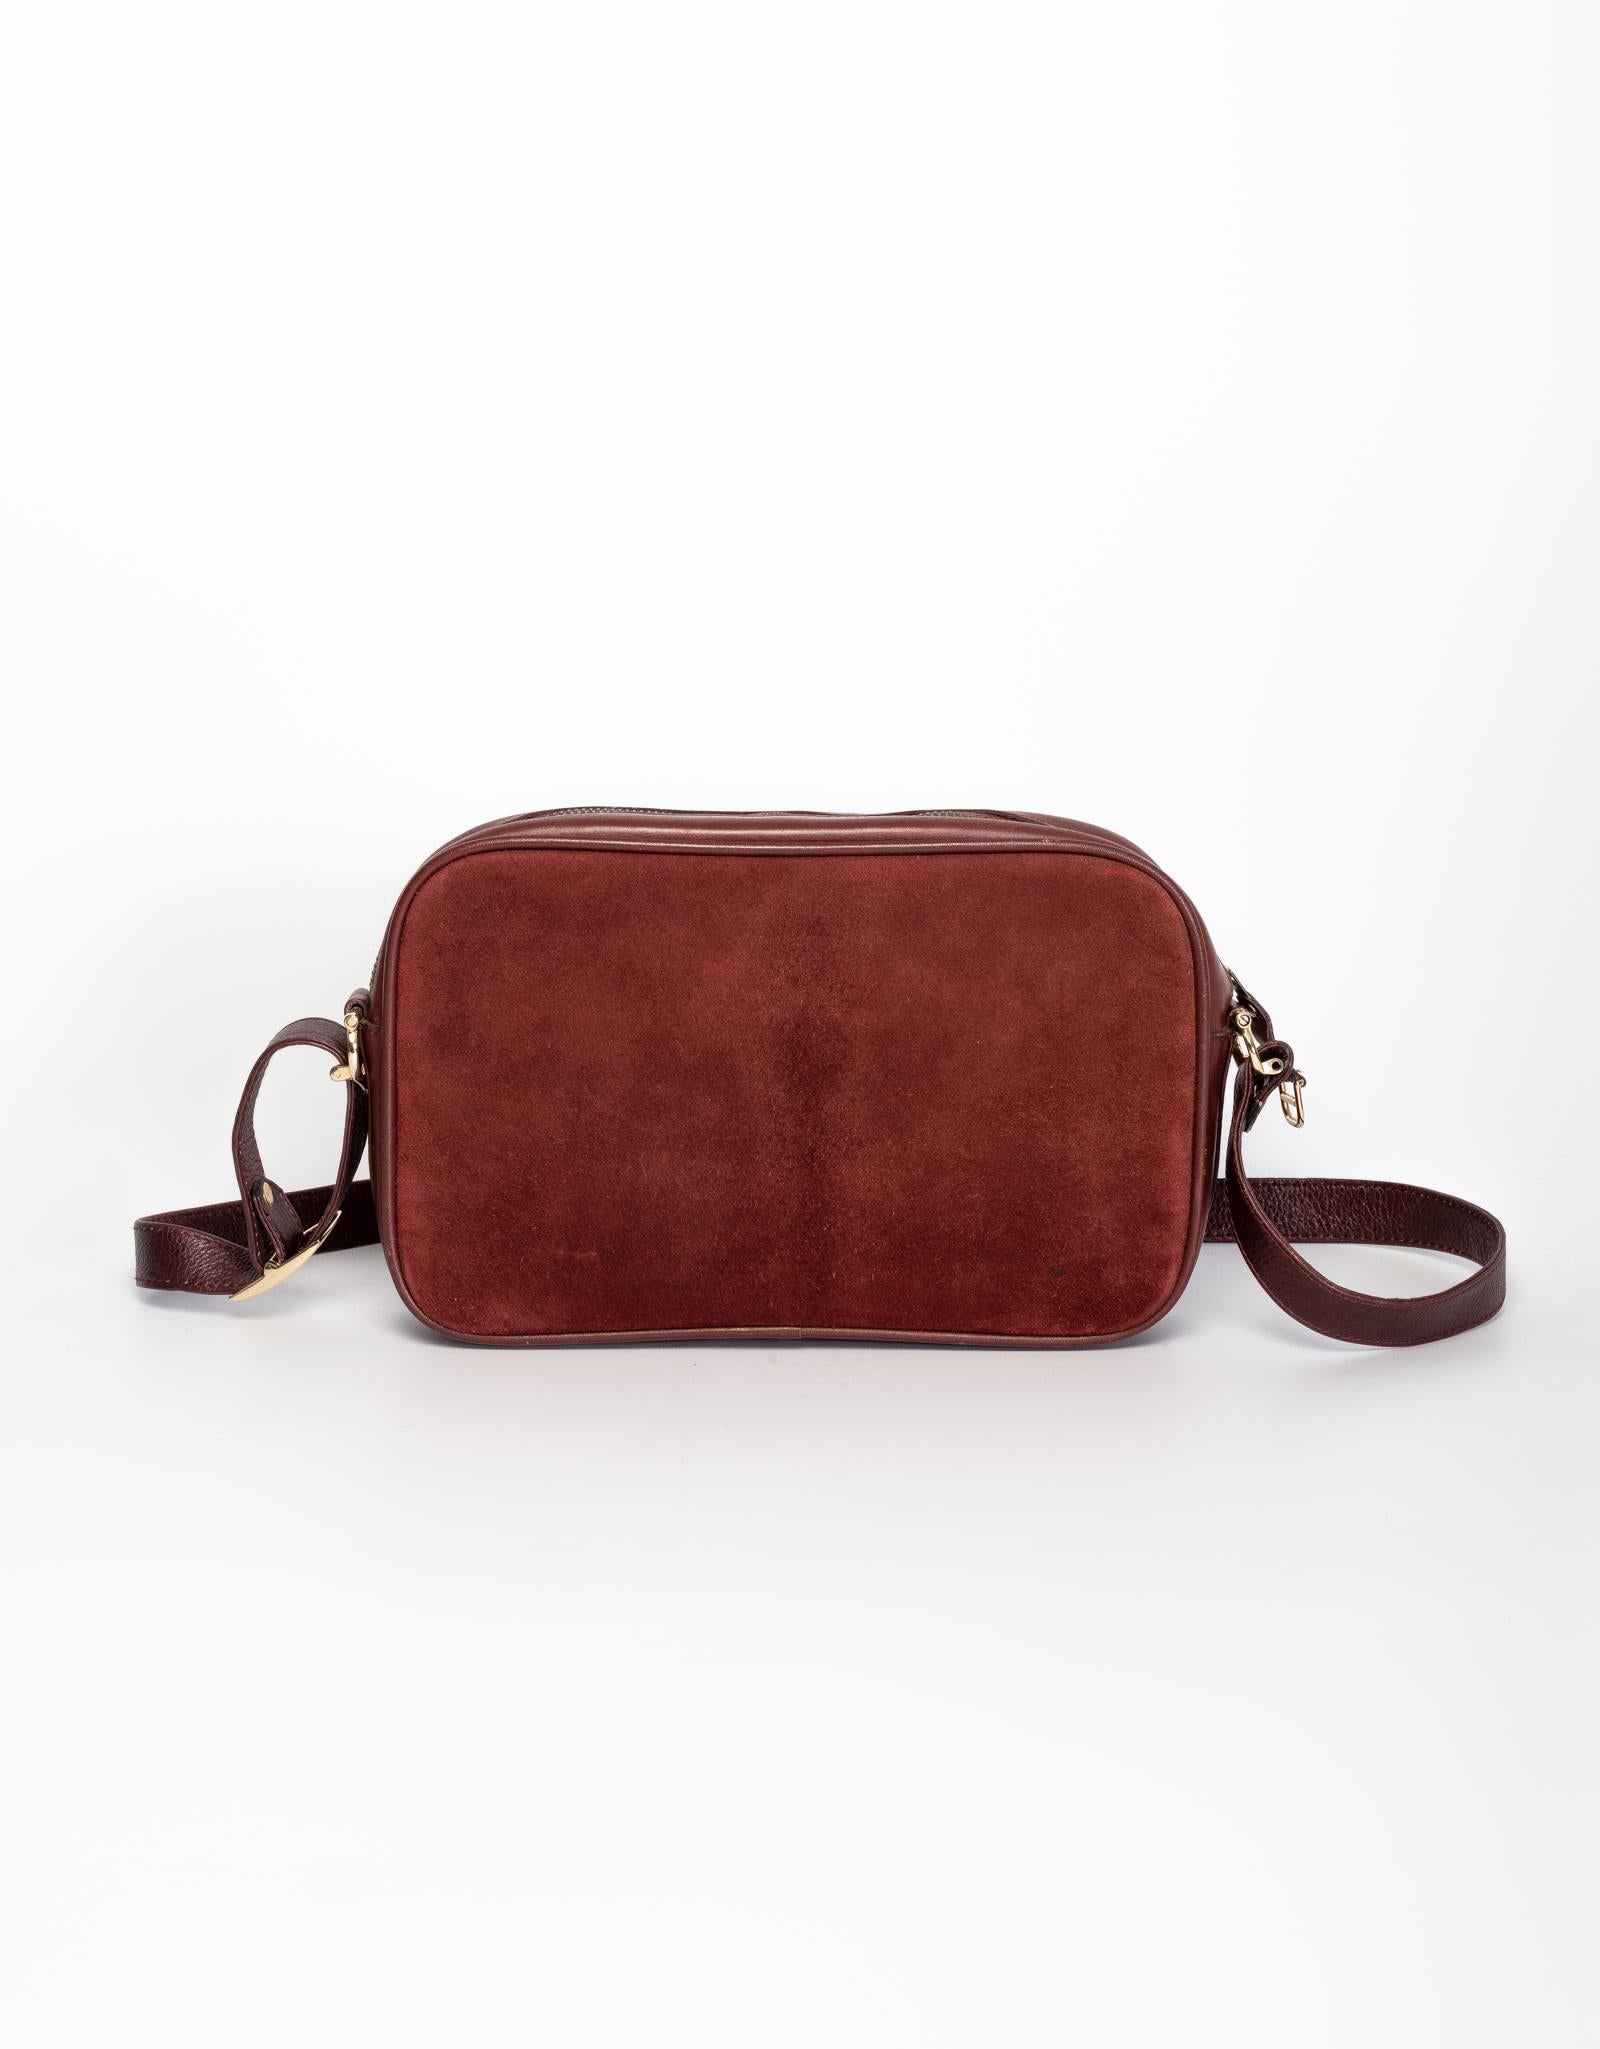 This bag is made out of suede with leather finishes and features a long strap with top zipper closure. 

COLOR: Bordeaux
MATERIAL: Suede with leather finishes
MEASURES: H 6.75” x L 10.5” x D 2.5” 
DROP: 35